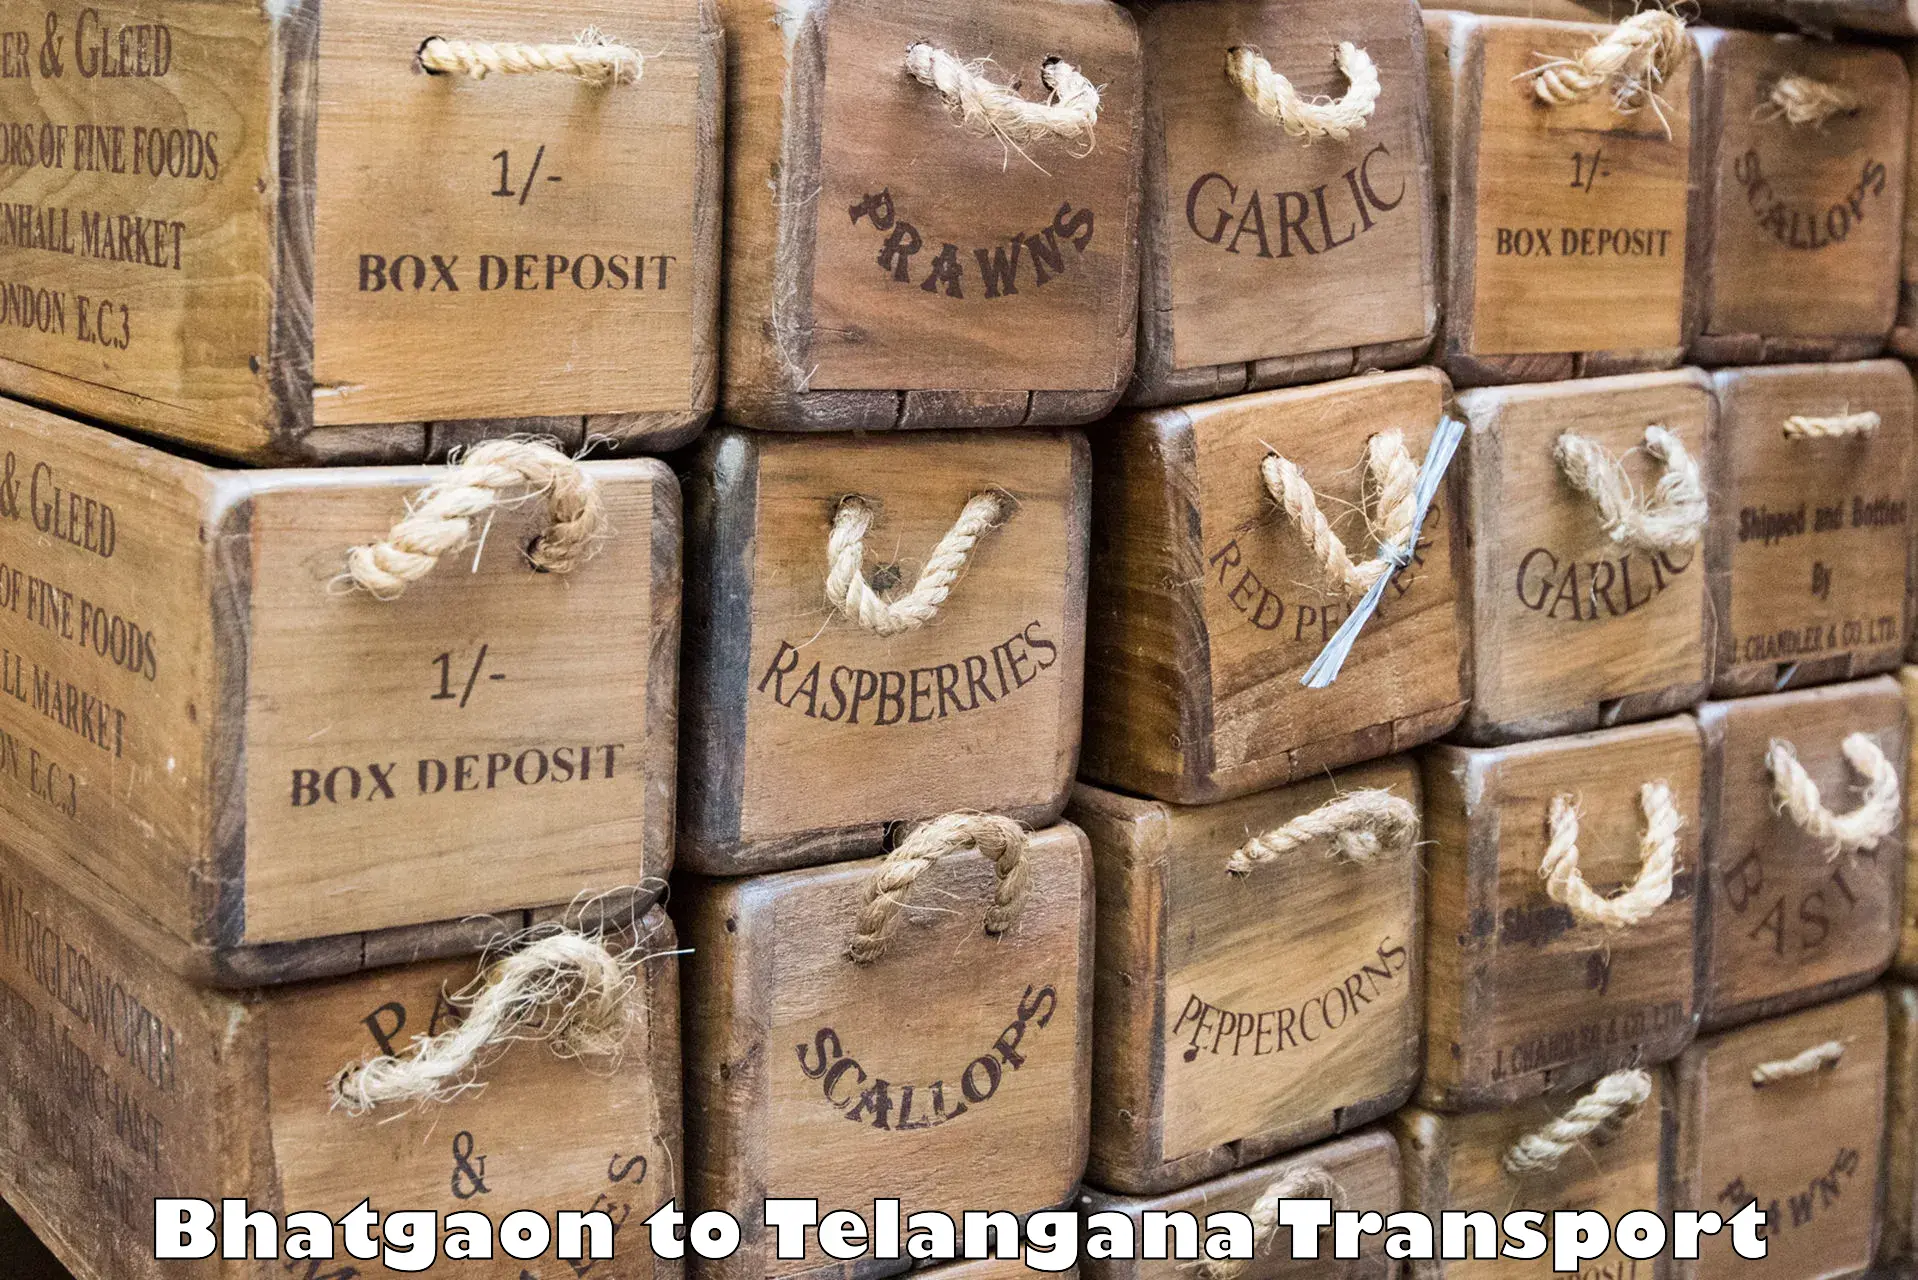 Air freight transport services Bhatgaon to Narayanpet